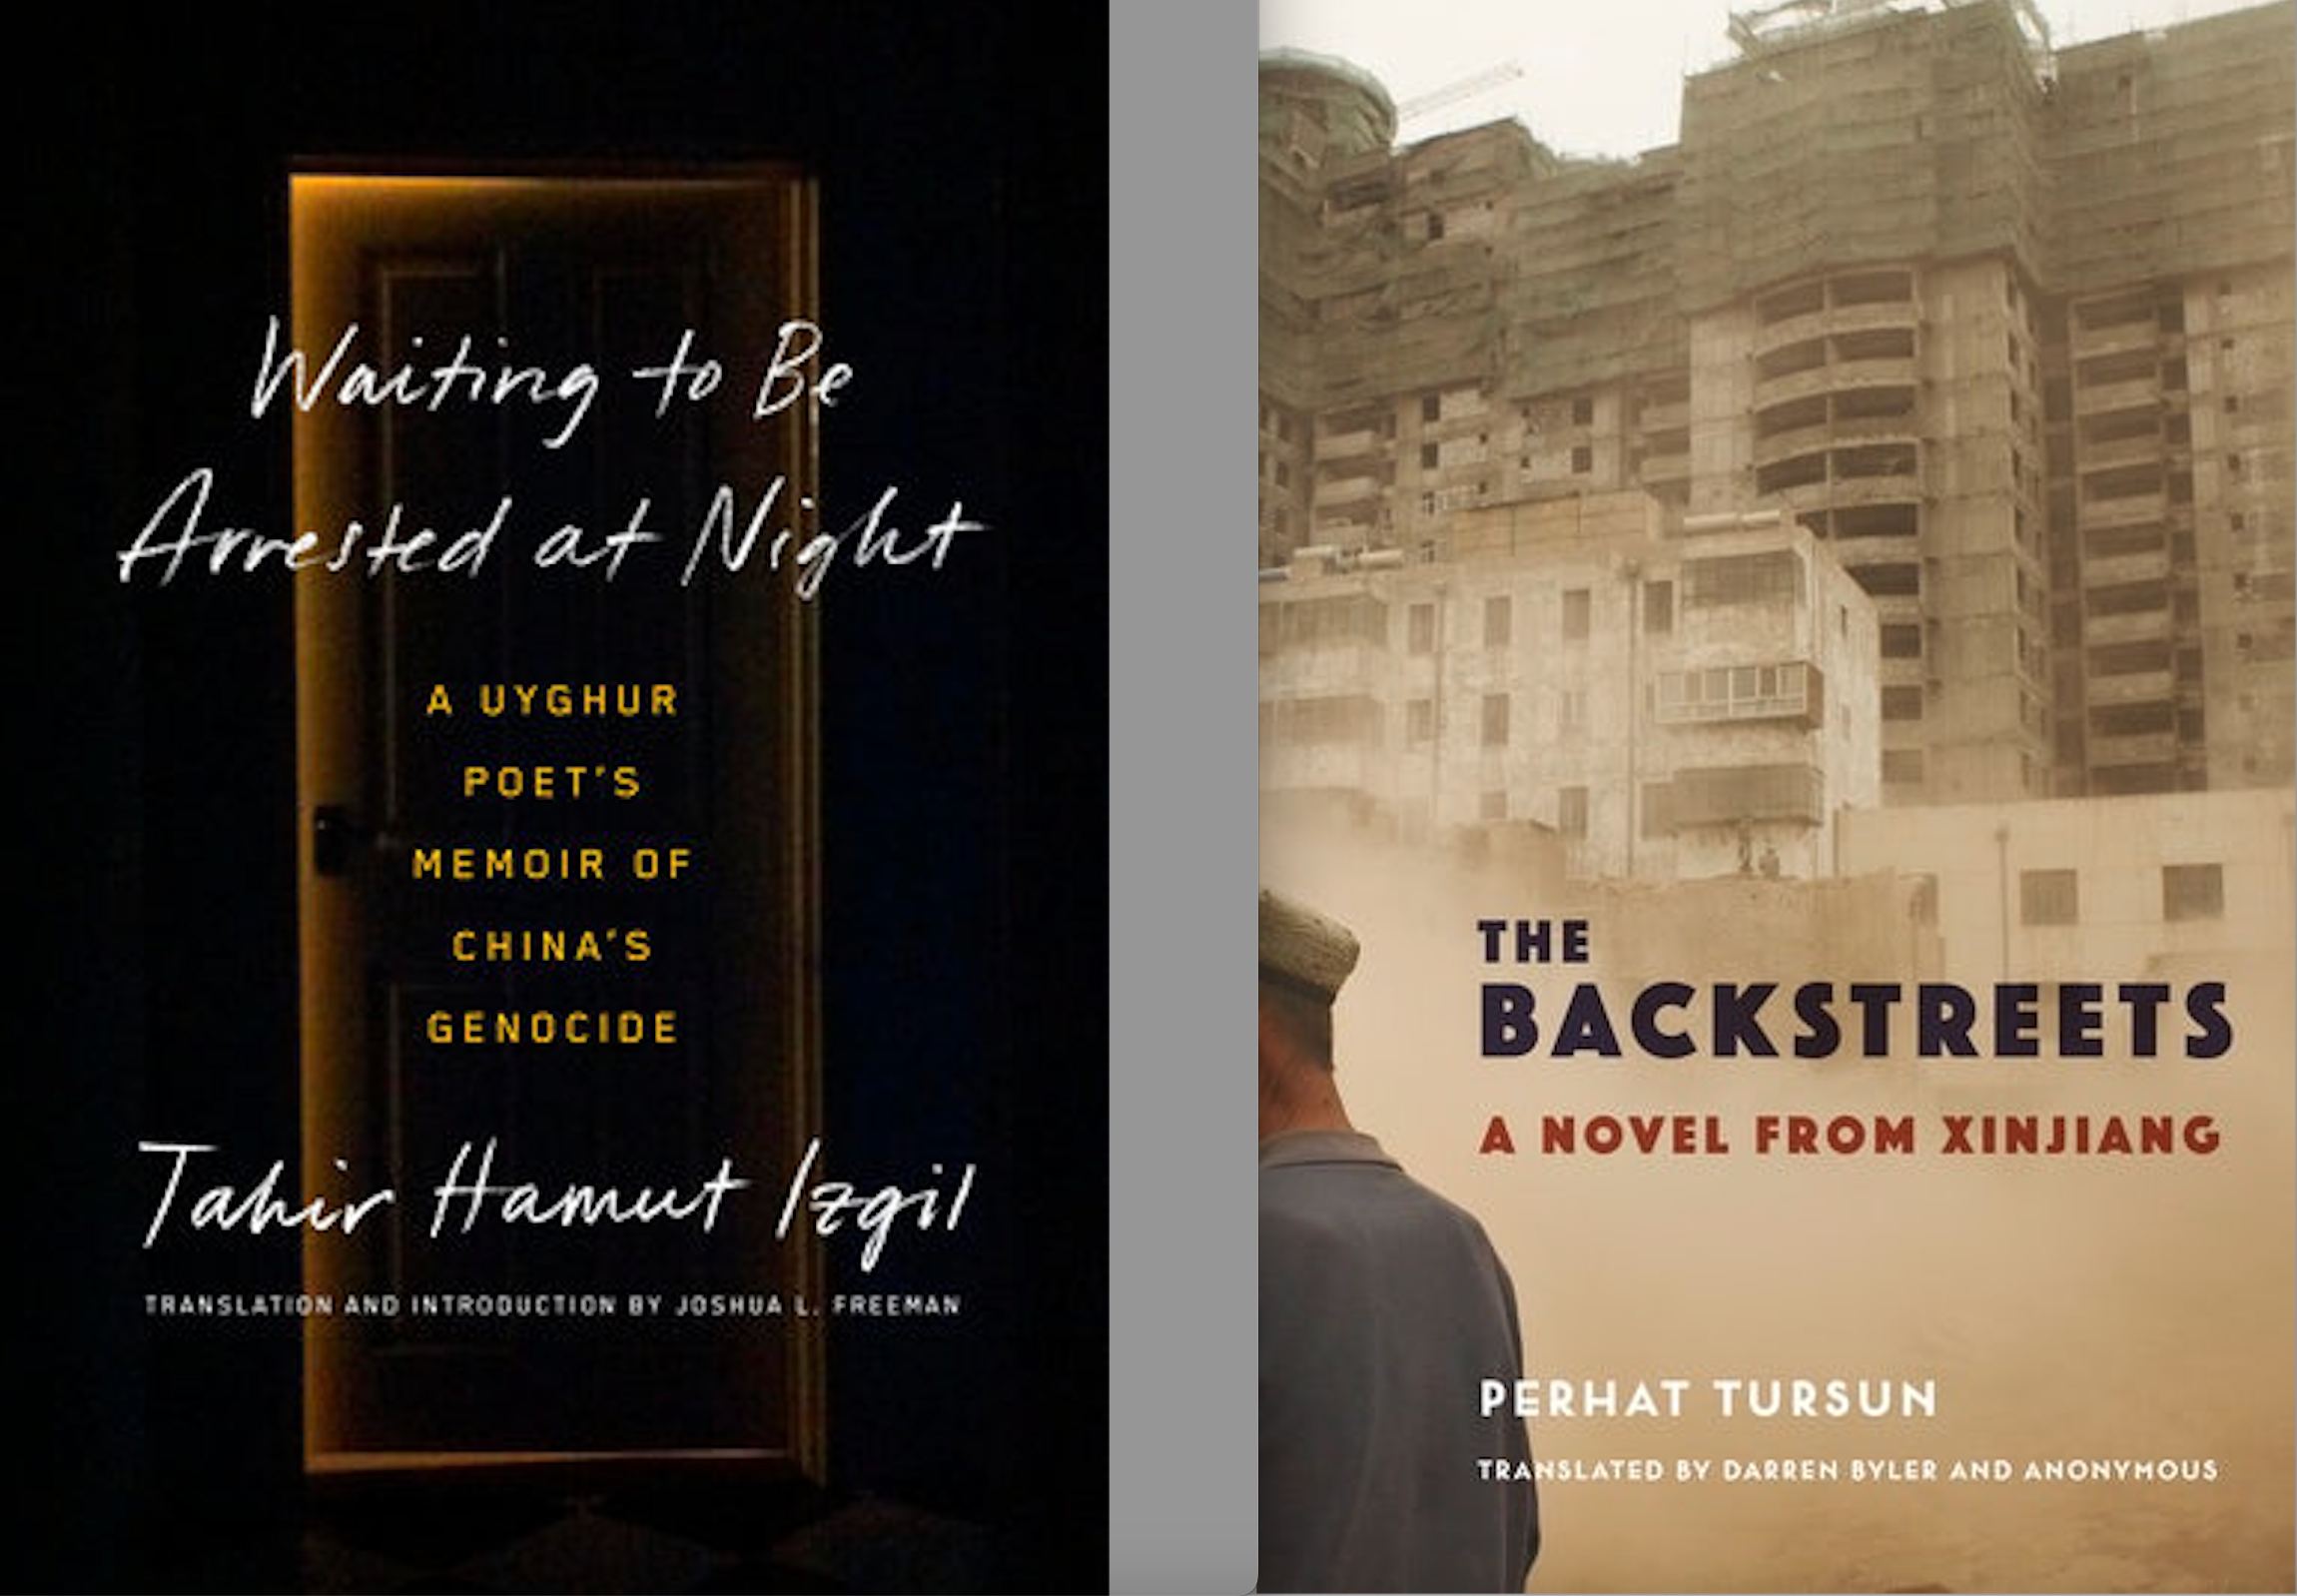 Fear and Writing in Xinjiang: On Tahir Hamut Izgil’s “Waiting to Be Arrested at Night” and Perhat Tursun’s “The Backstreets”